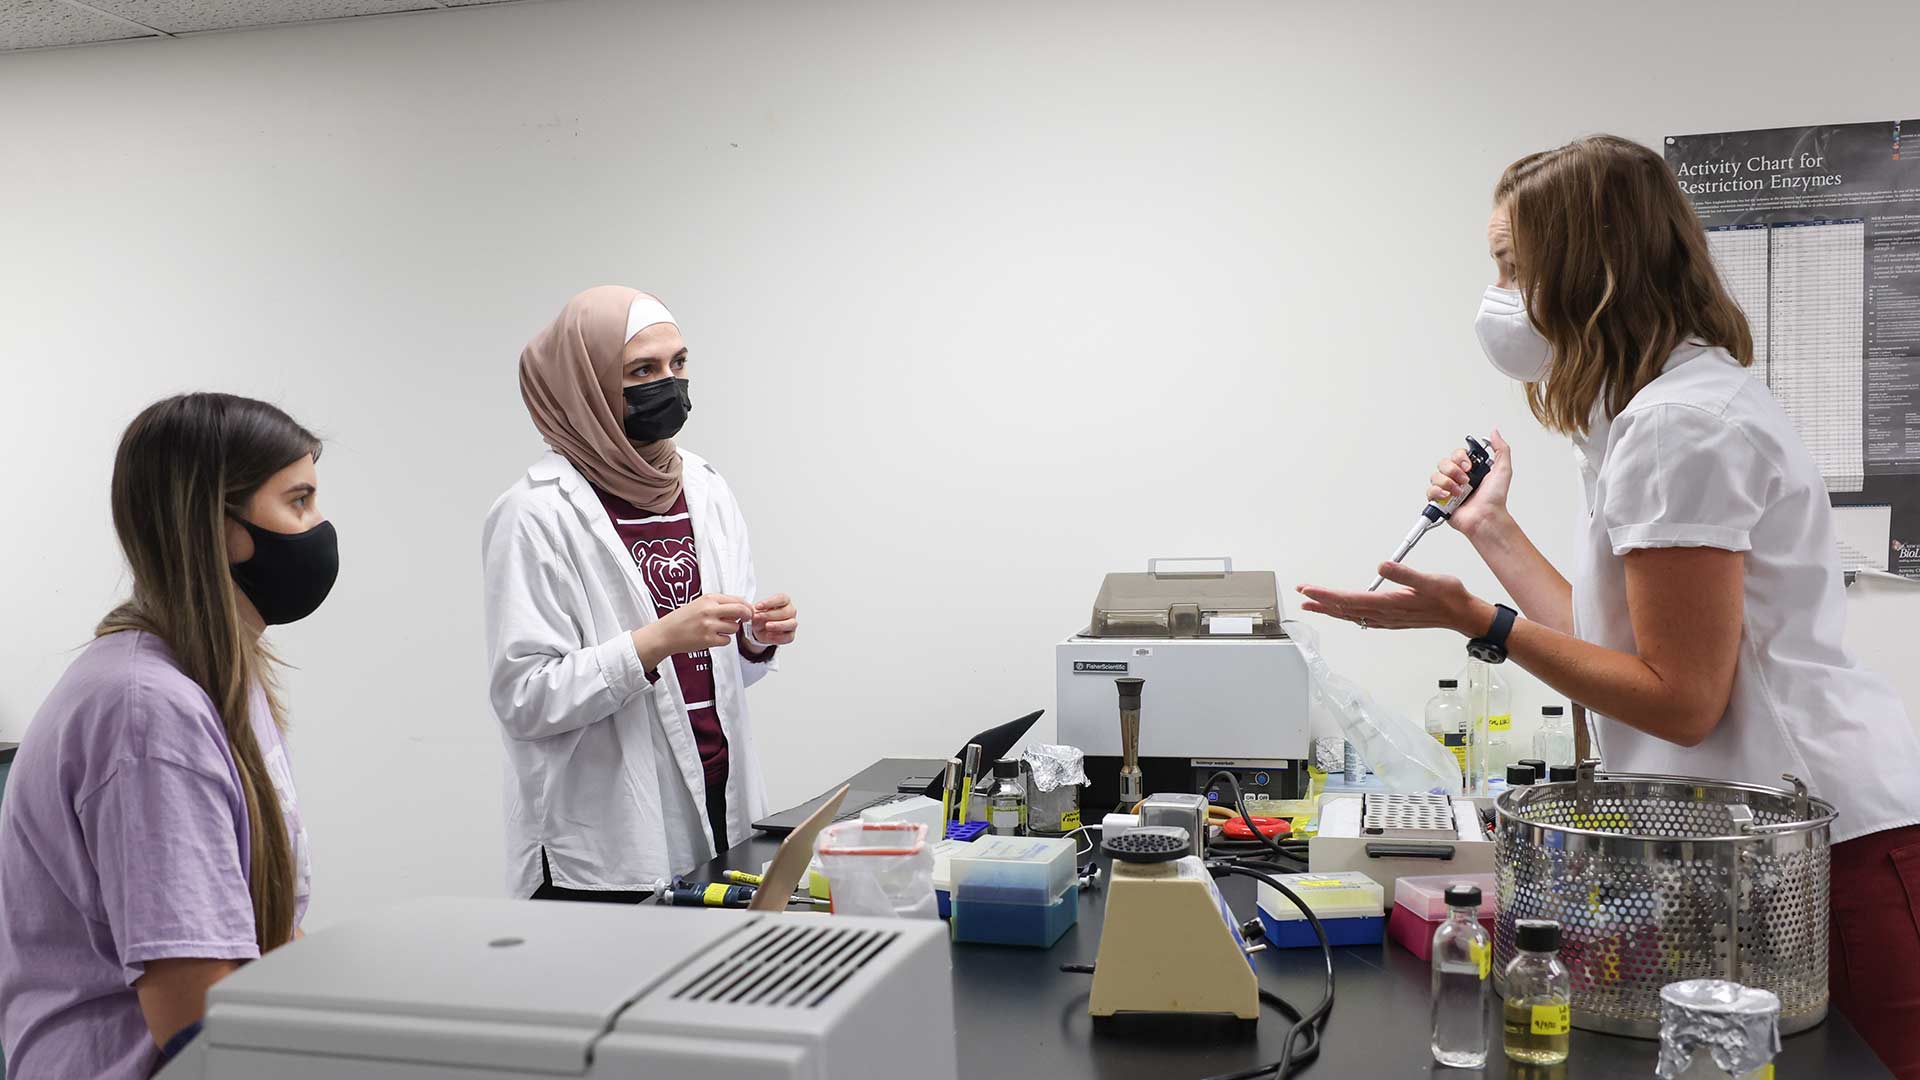 Professor instructing two students during a lab class.